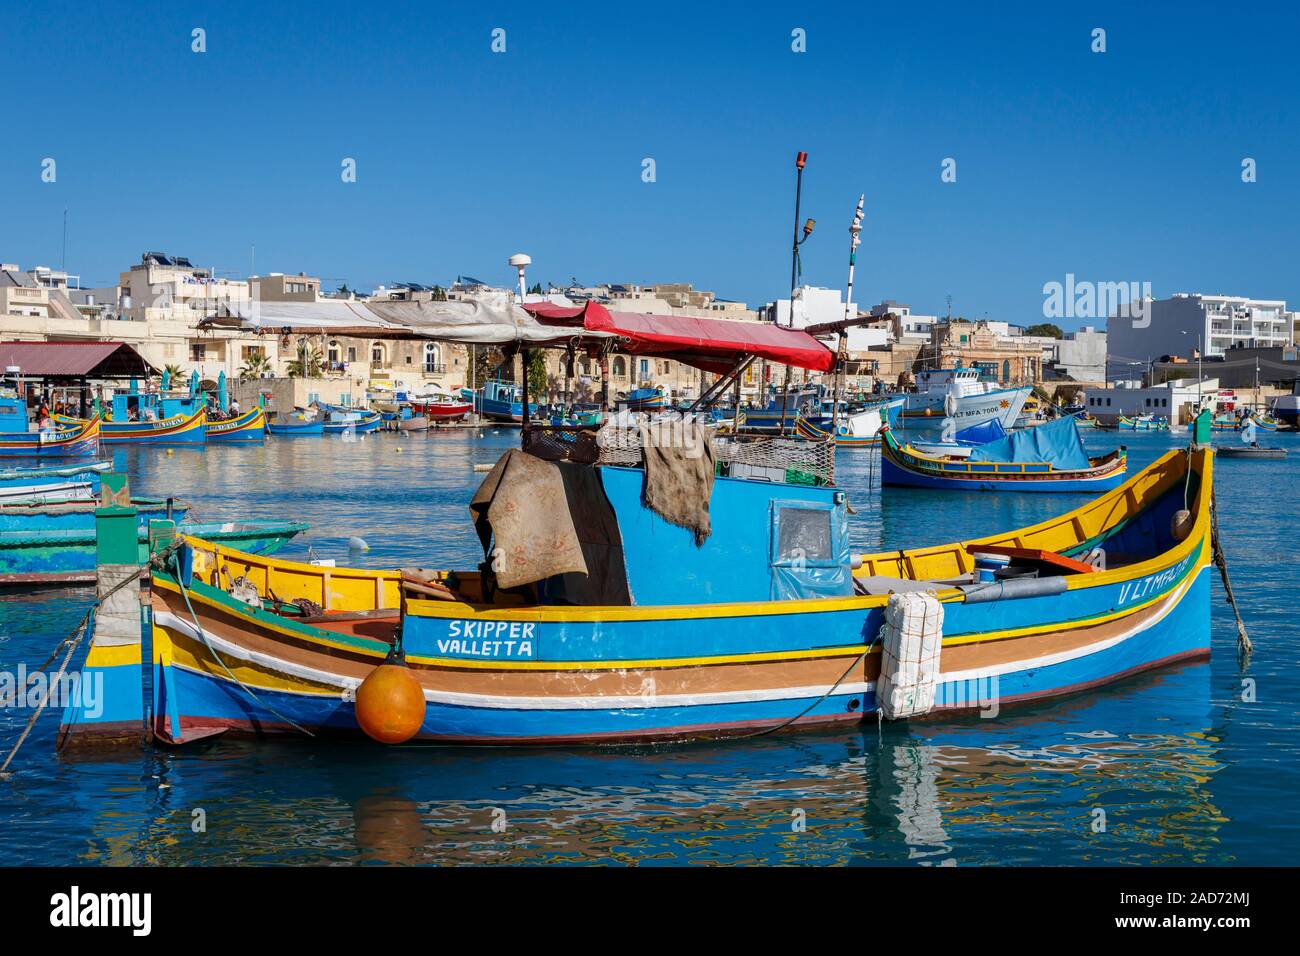 Marsaxlokk (Southern Port) fishing village in Malta , Europe. A popular tourist destination with a bay and fishing boats. Stock Photo